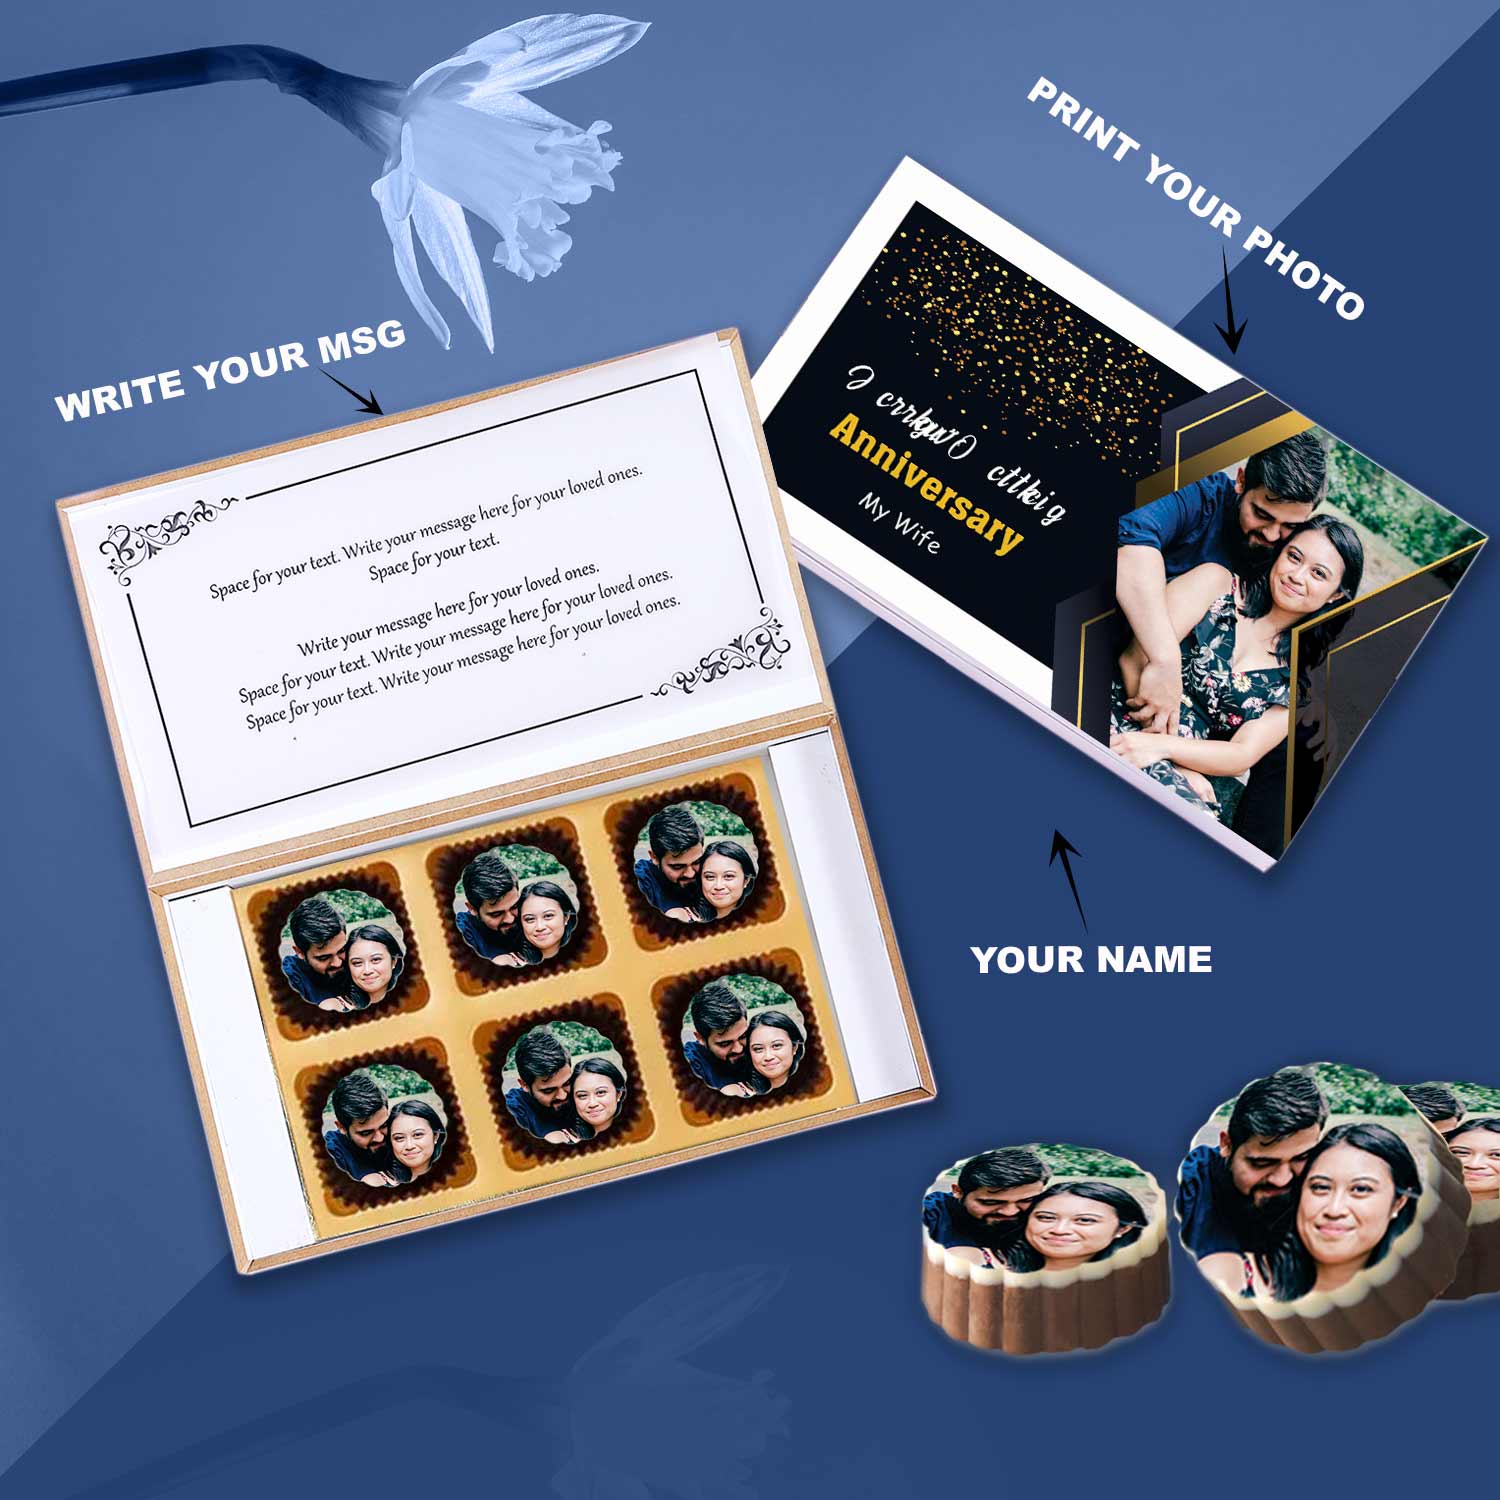 Make your anniversary happiest with customised chocolates